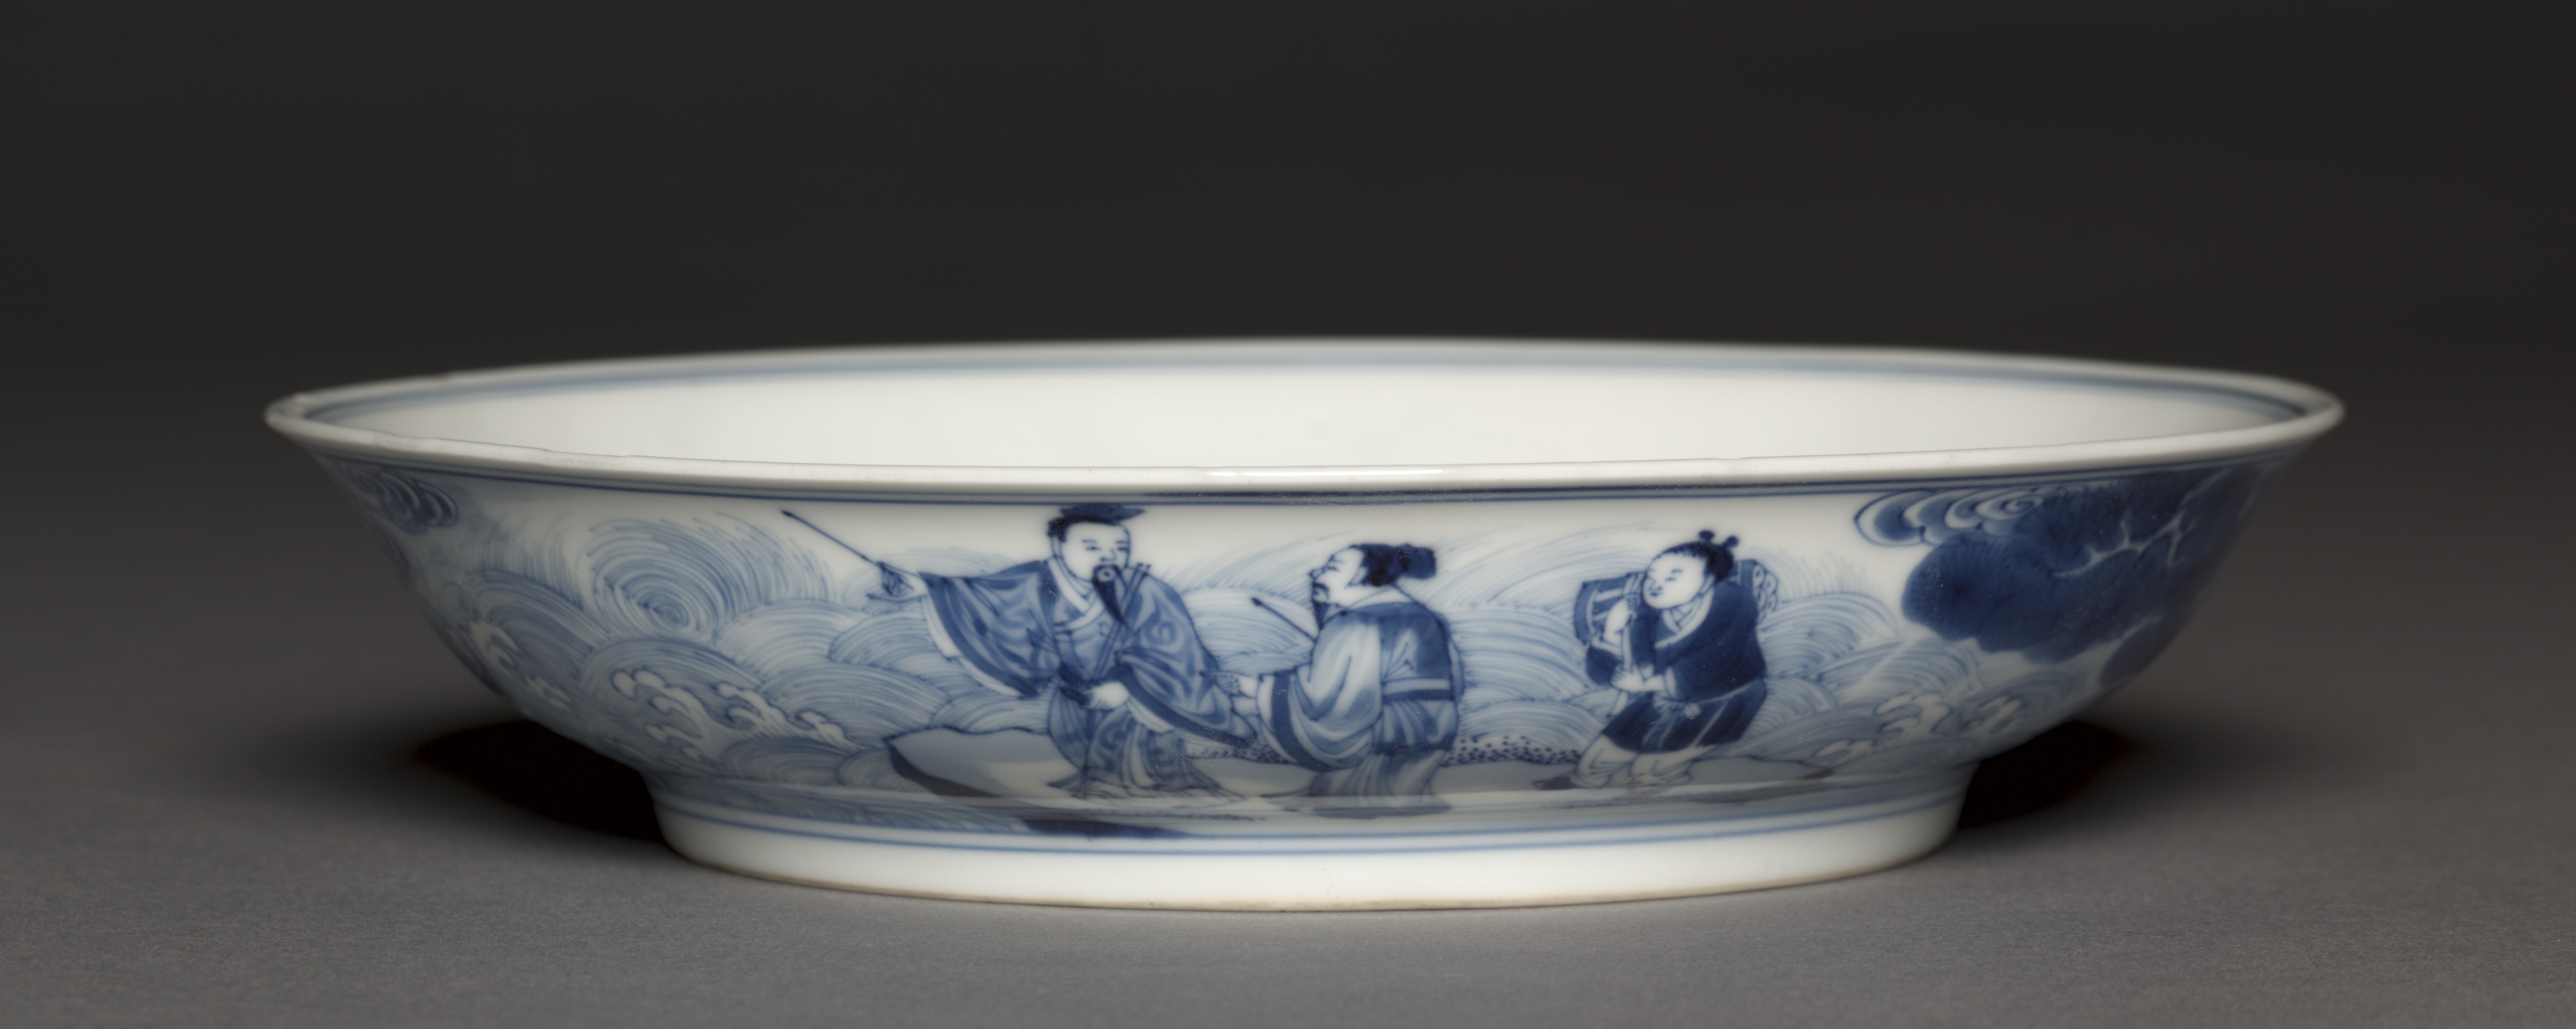 Dish with Laozi Riding a Water Buffalo (interior); Pavilion and Immortals in Rocky Landscape (exterior)